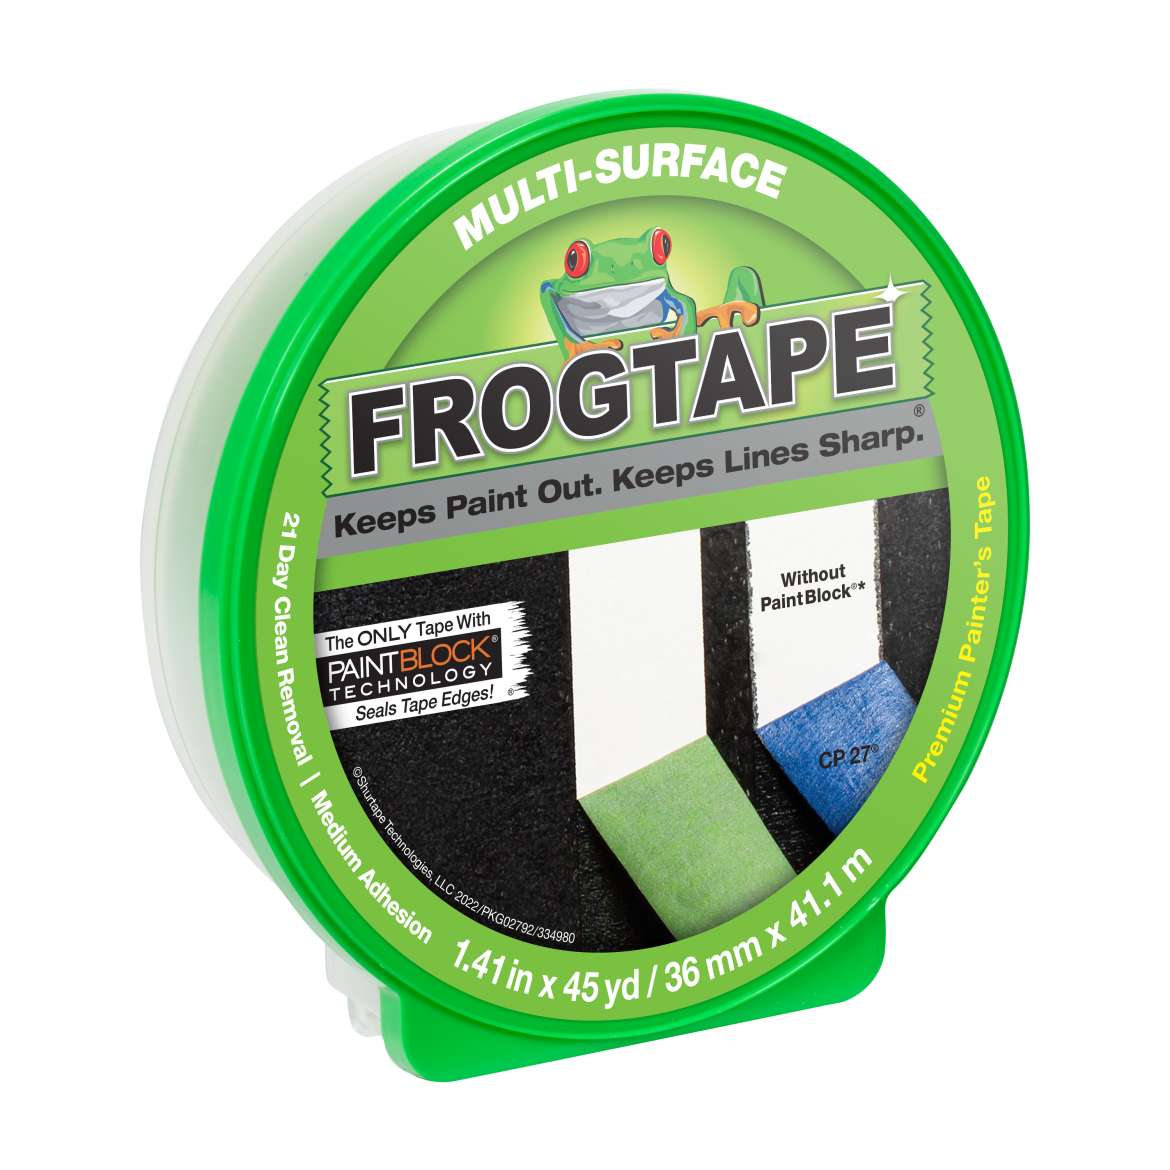 FrogTape® Multi-Surface Painting Tape - Green, 1.41 in. x 45 yd.